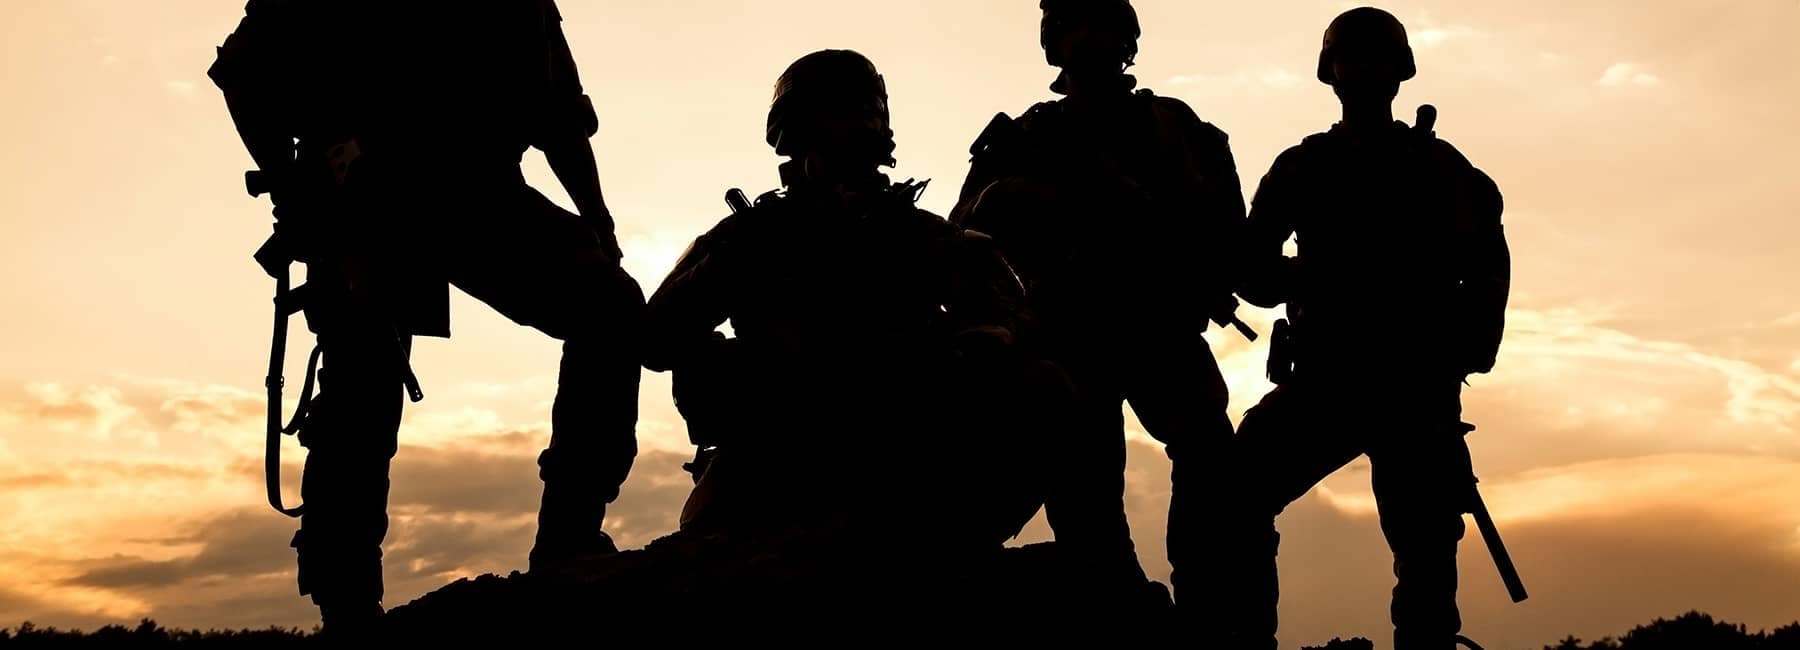 silhouette of military personnel